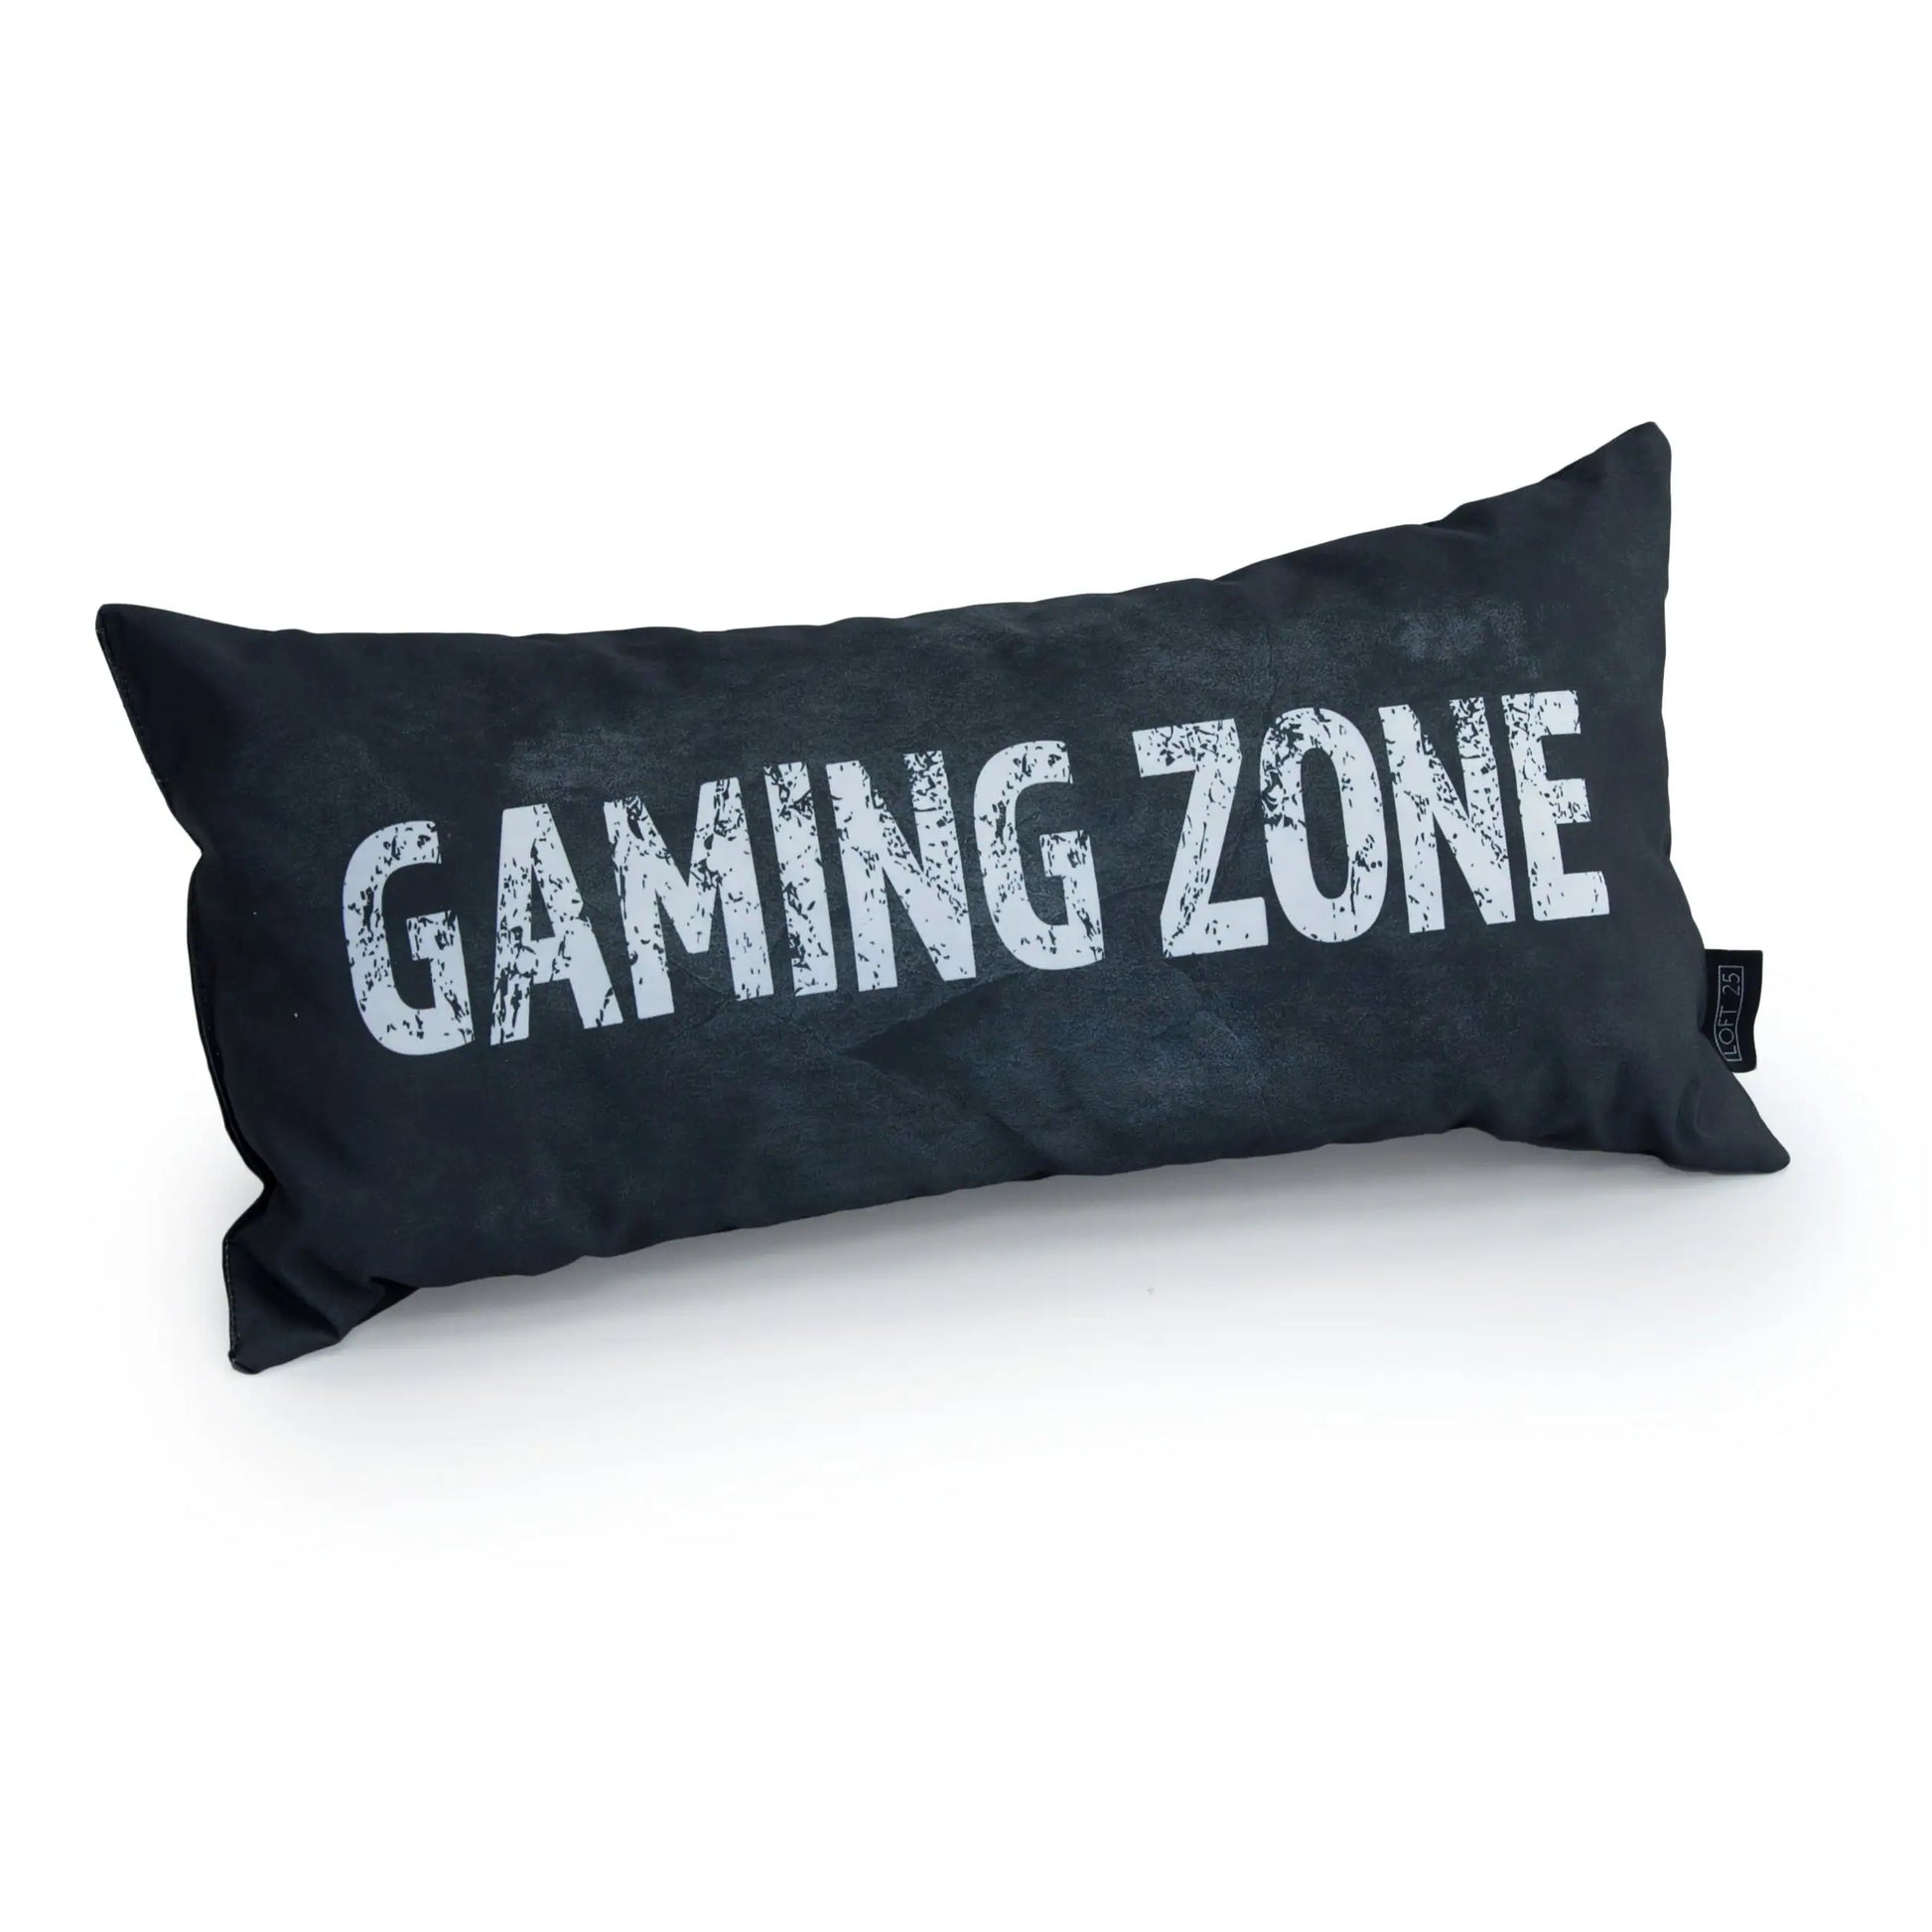 A white pillow with the words "GAMING ZONE" written on it in silver and white.